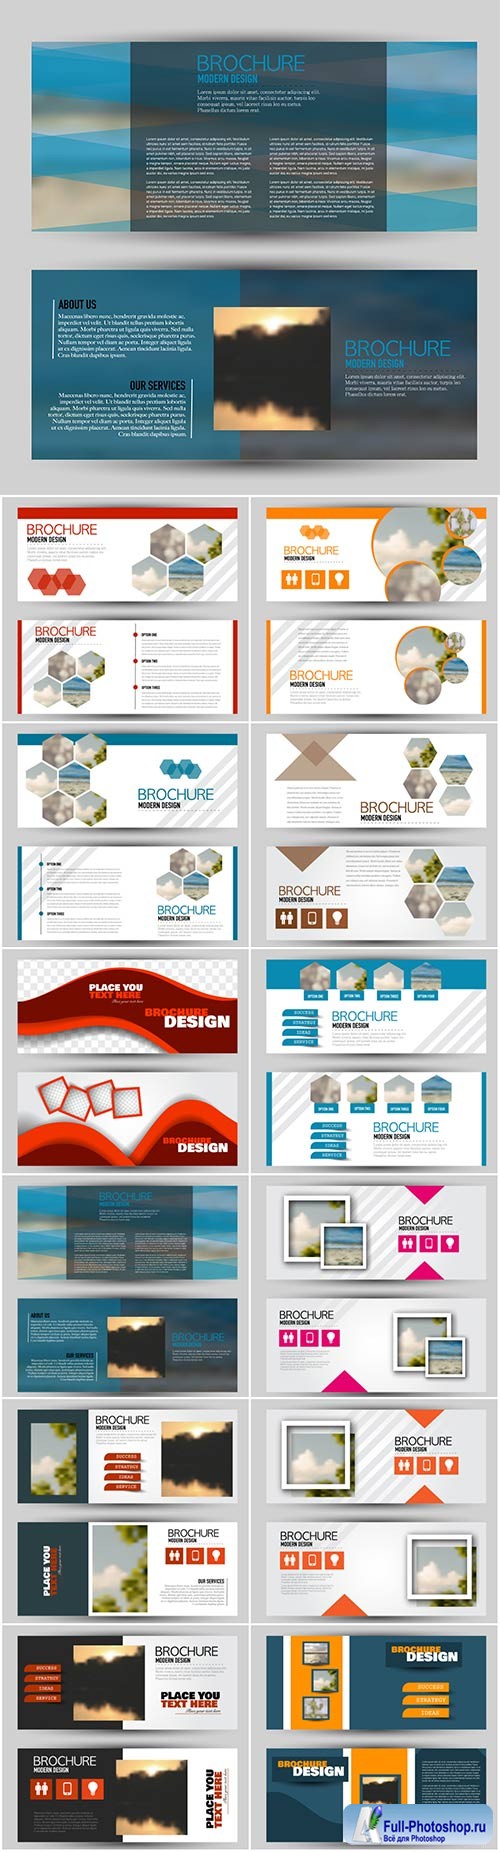 Set of banners for web and advertisement print out, vector horizontal flyer handout design # 4